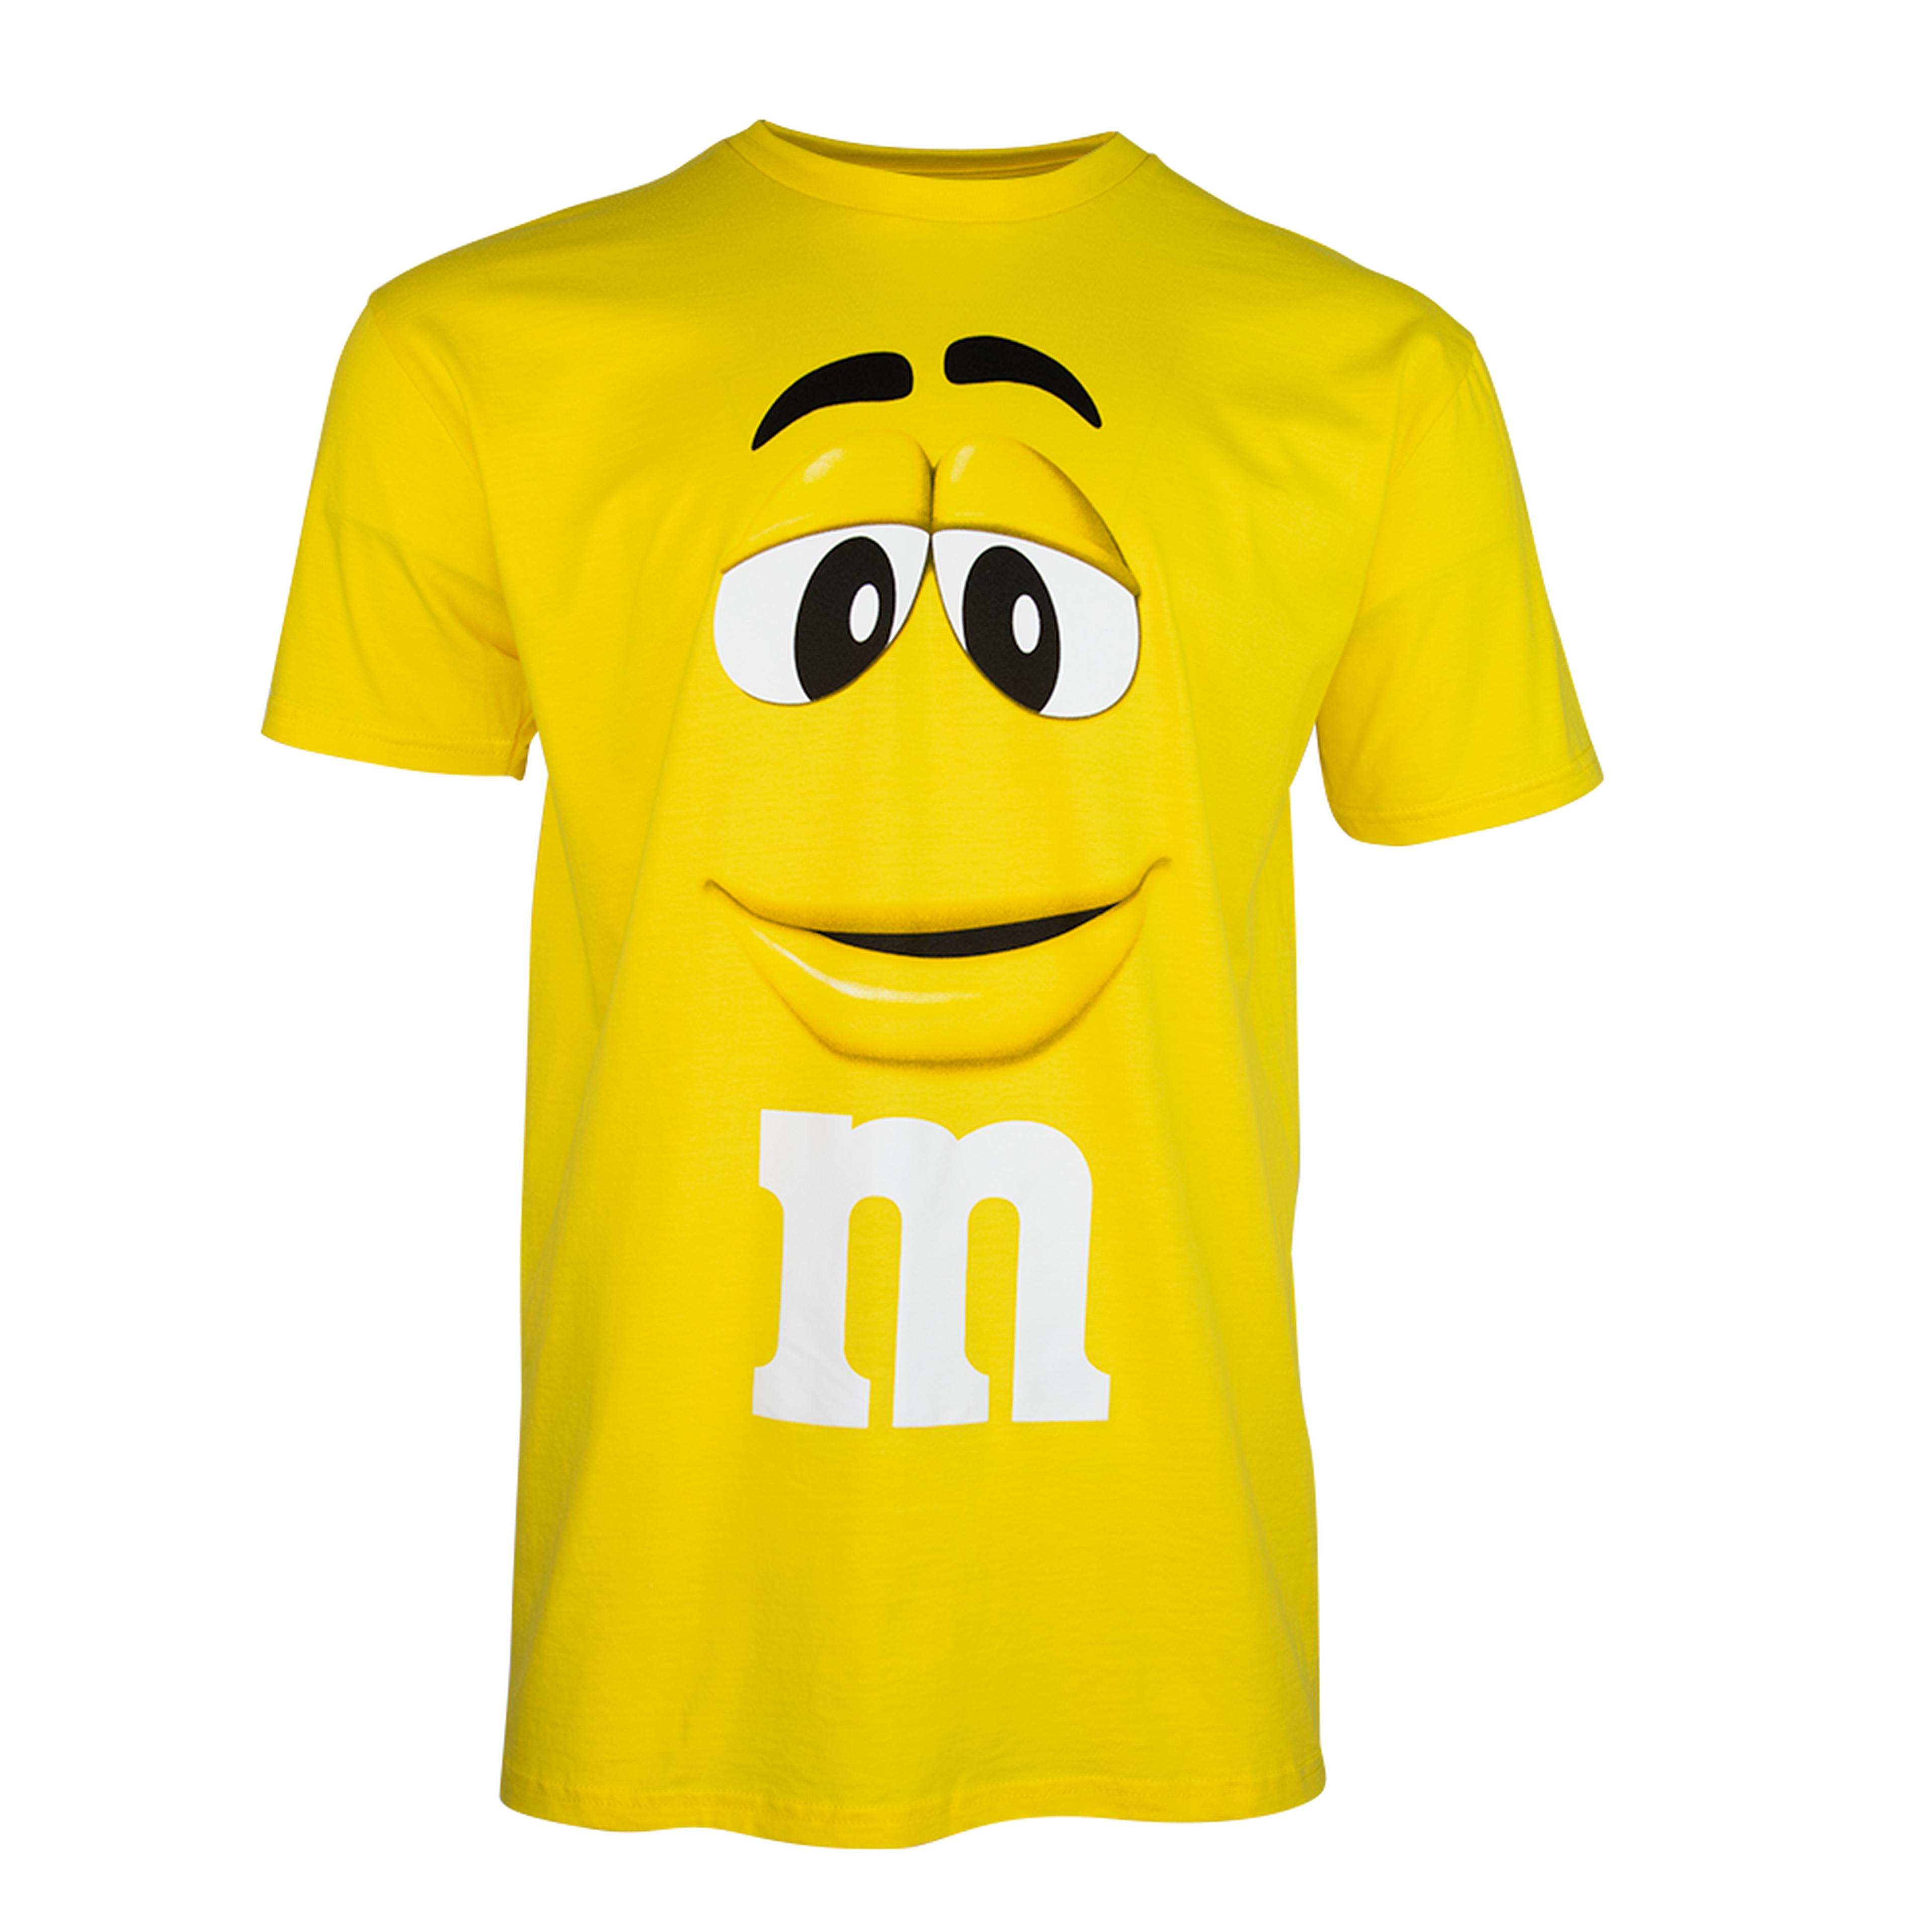 Adult M&M'S Character T-Shirt 0